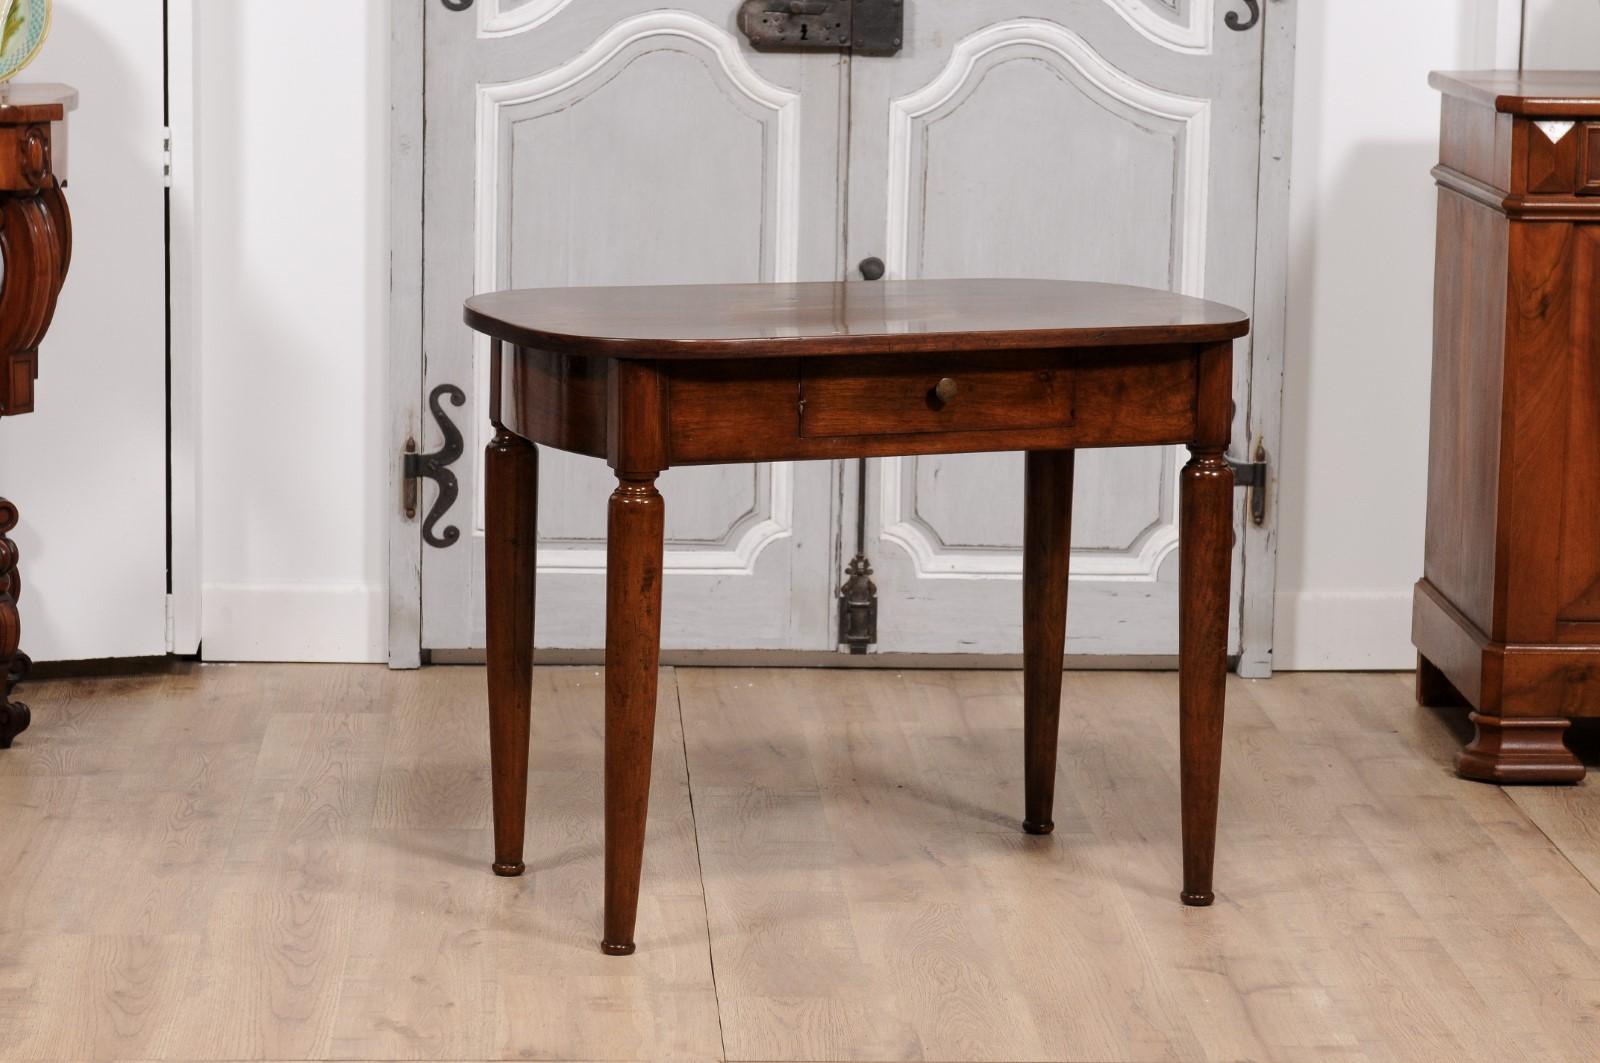 Turned Italian Walnut 1890s Side Table with Oval Top, One Drawer and Cylindrical Legs For Sale